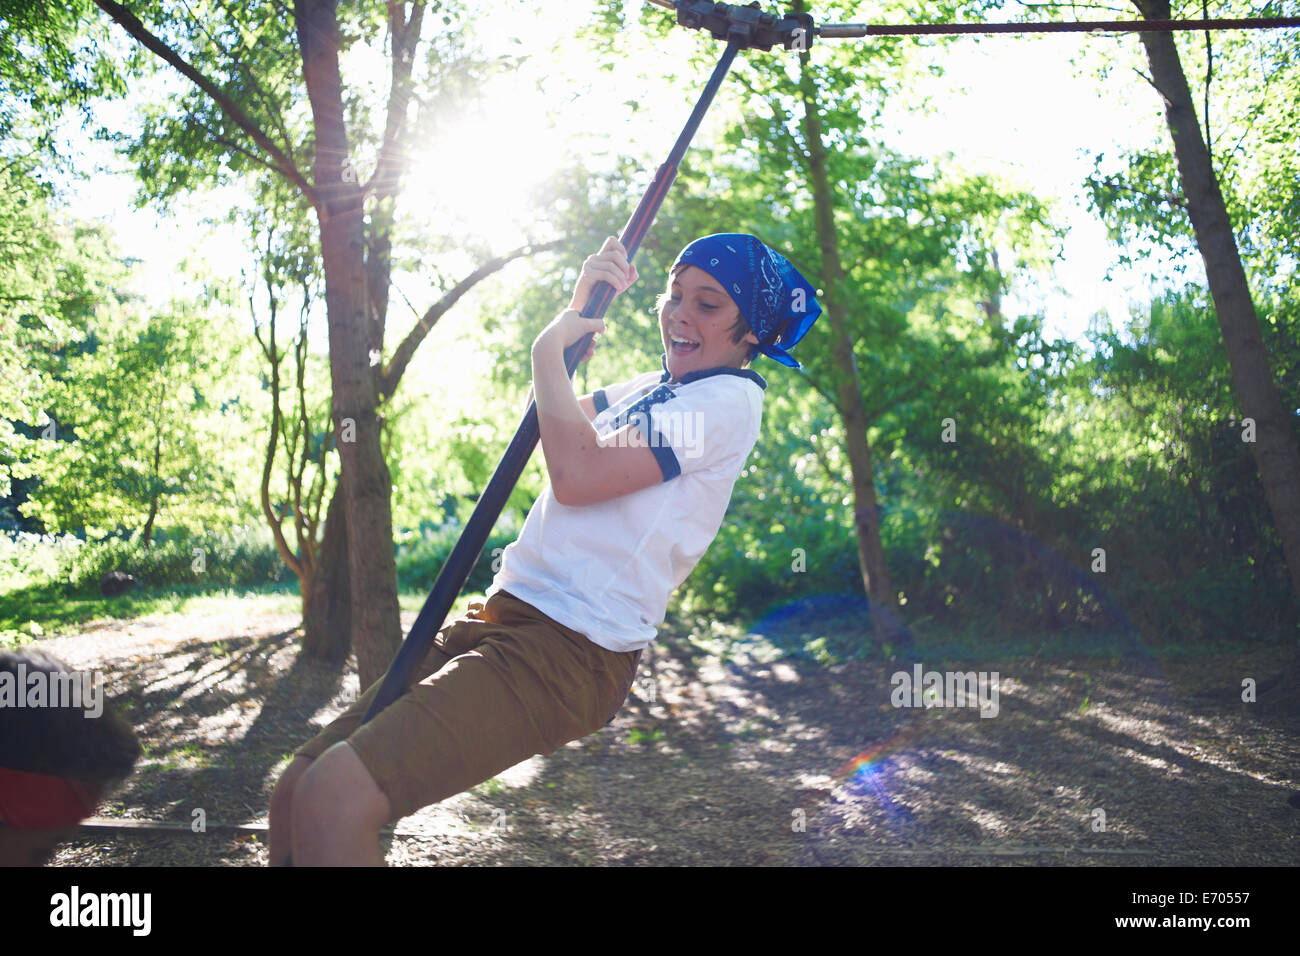 Young boy in fancy dress, on zip wire Stock Photo